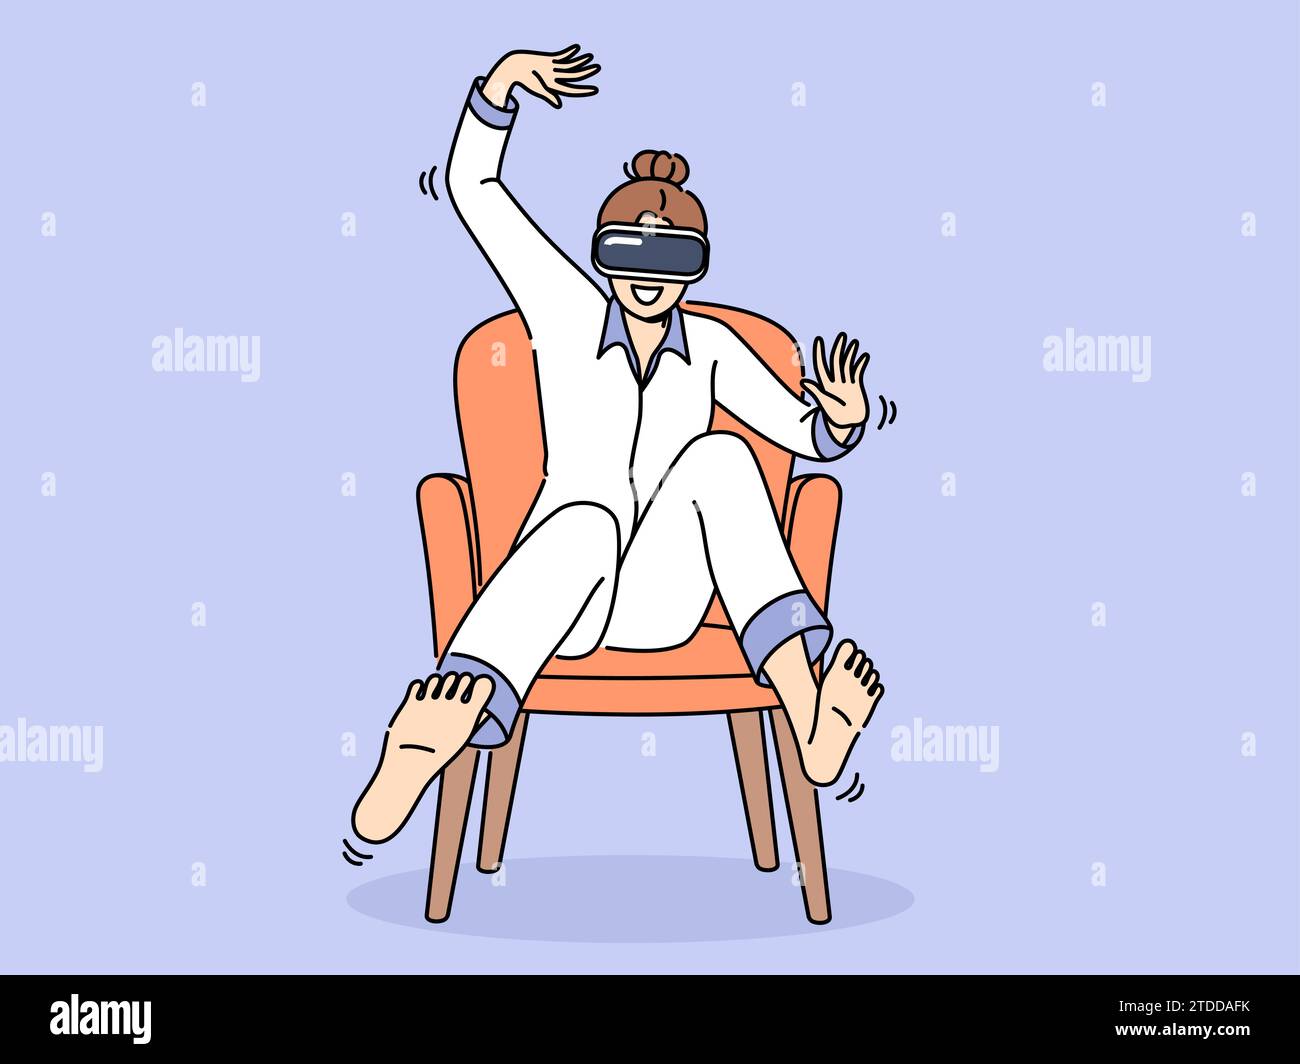 Woman wearing vr headset sits in chair and waves arms and legs, feeling euphoria of being immersed in virtual reality. Girl in pajamas uses vr glasses to travel through metaverse and play video games. Stock Vector